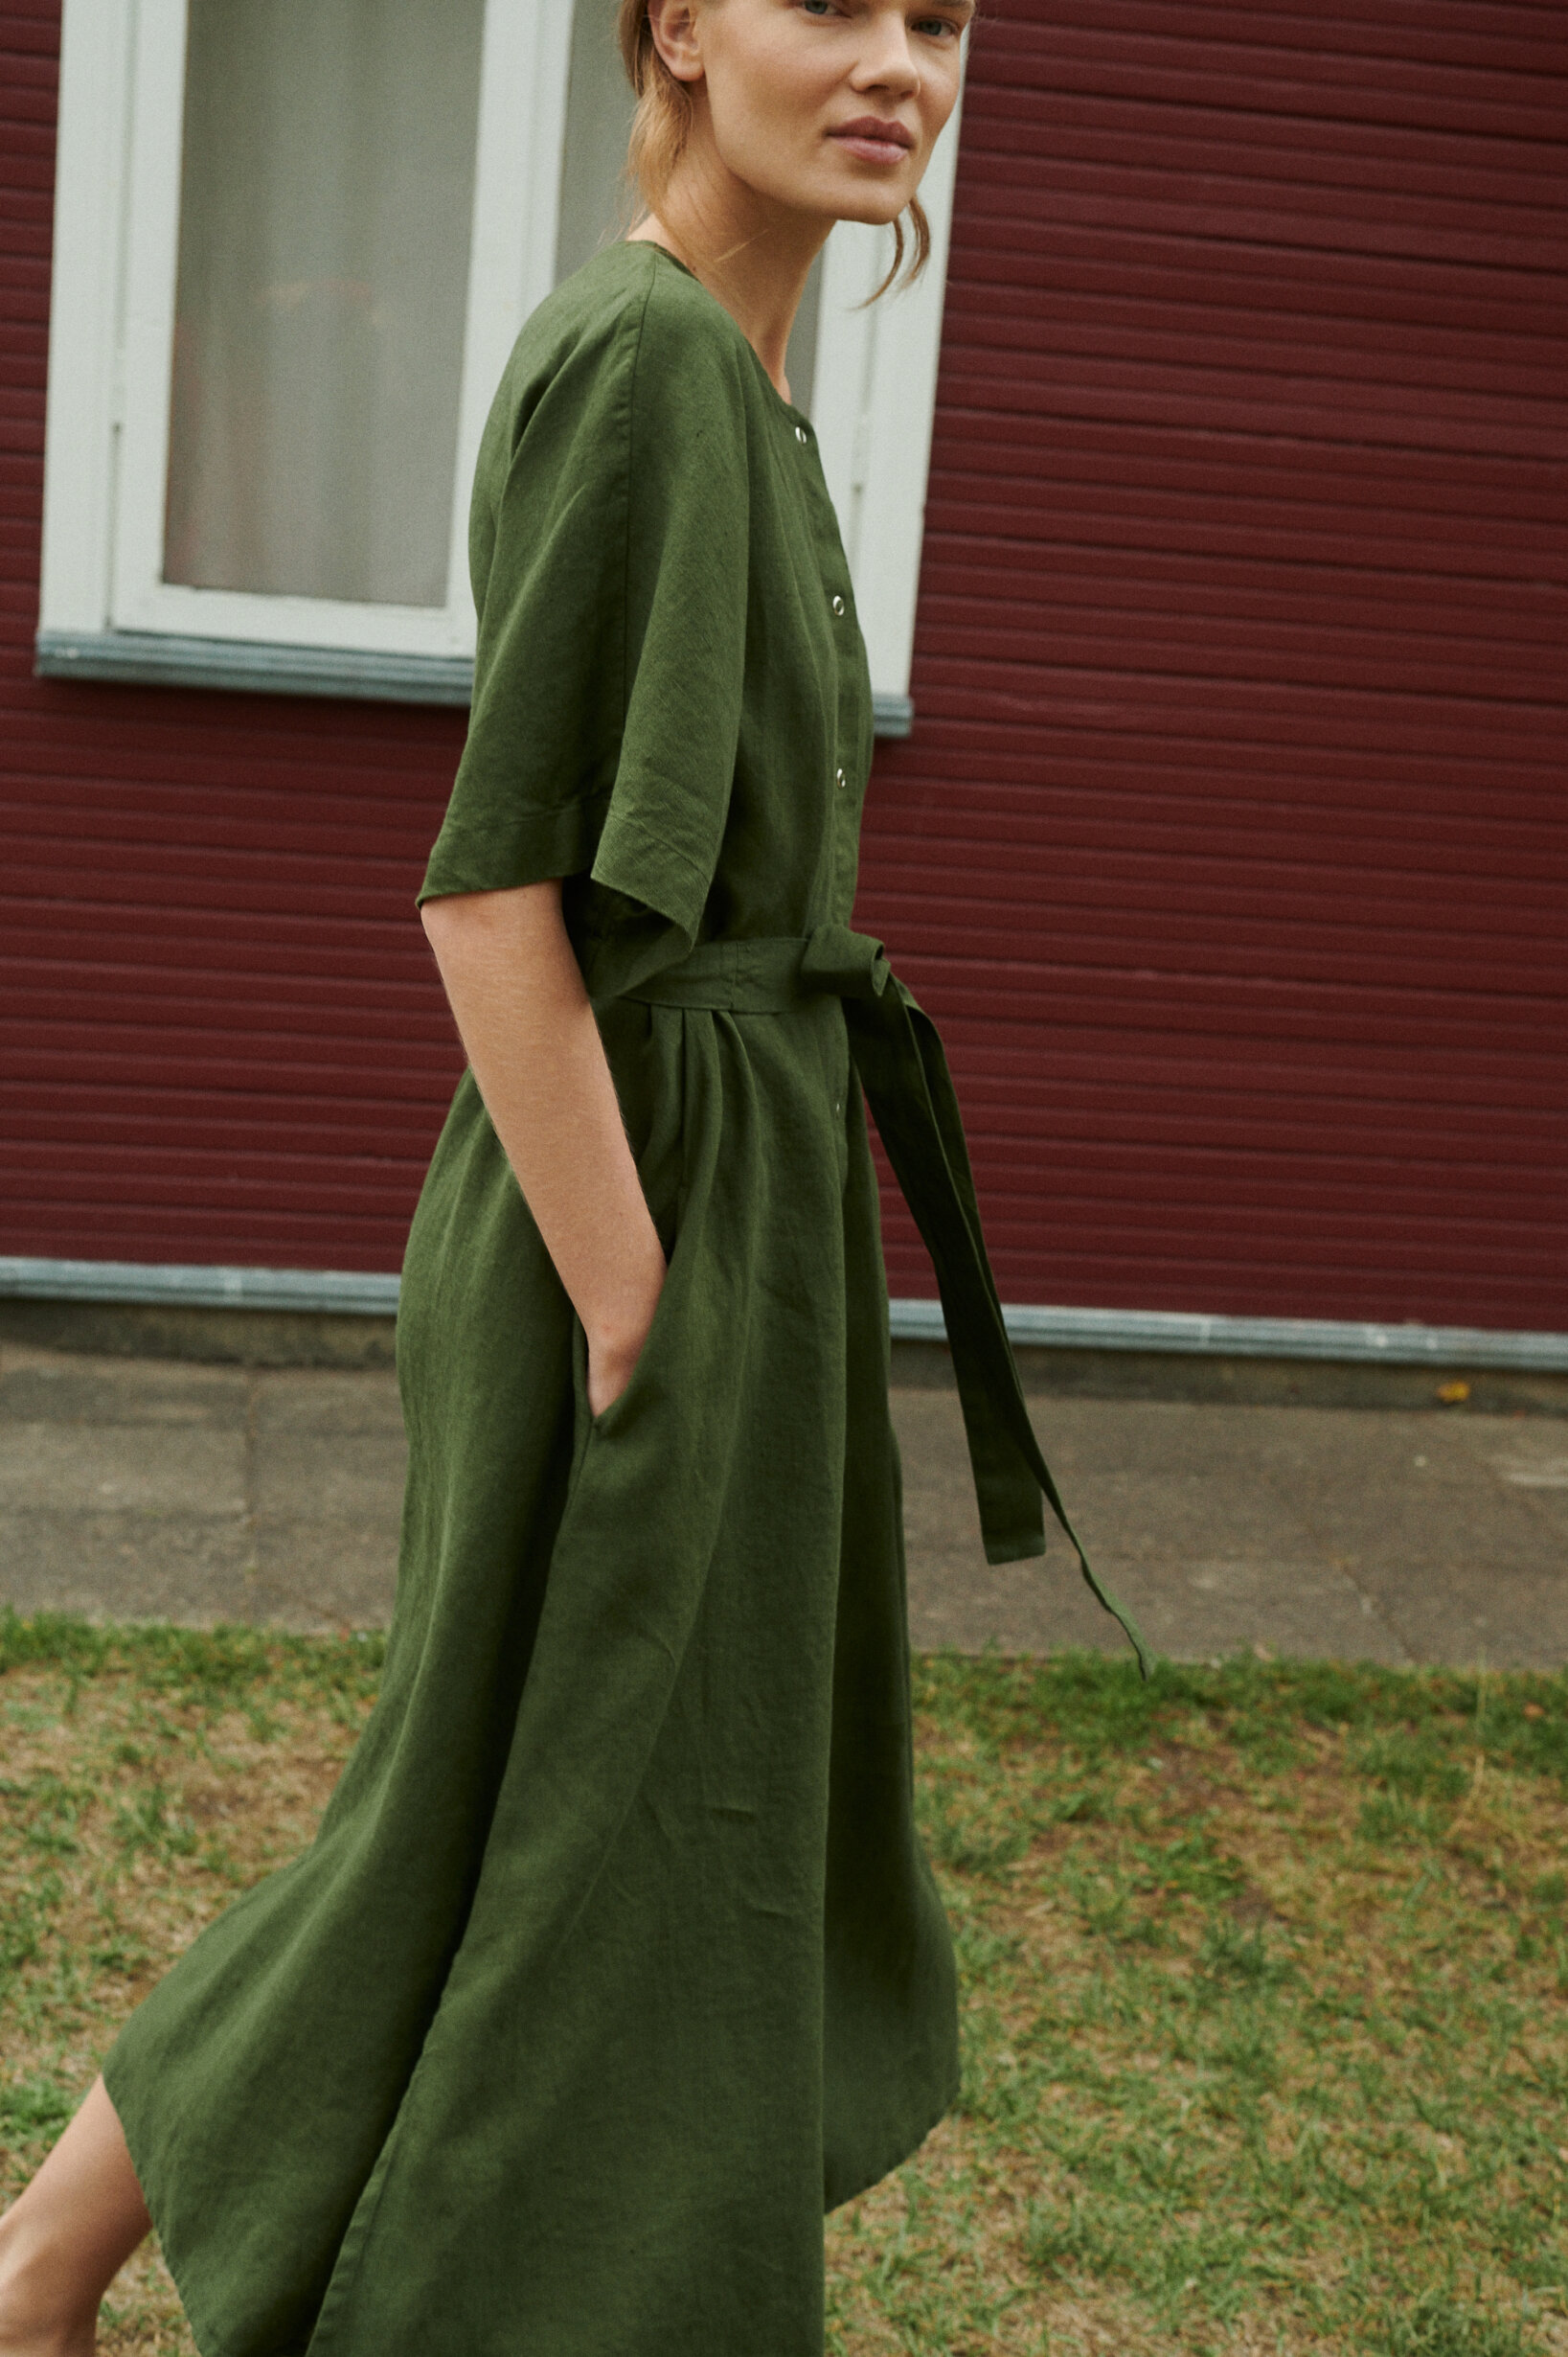 model wearing oversized summer linen dress in forest green with snap openings and pockets outside the summer house